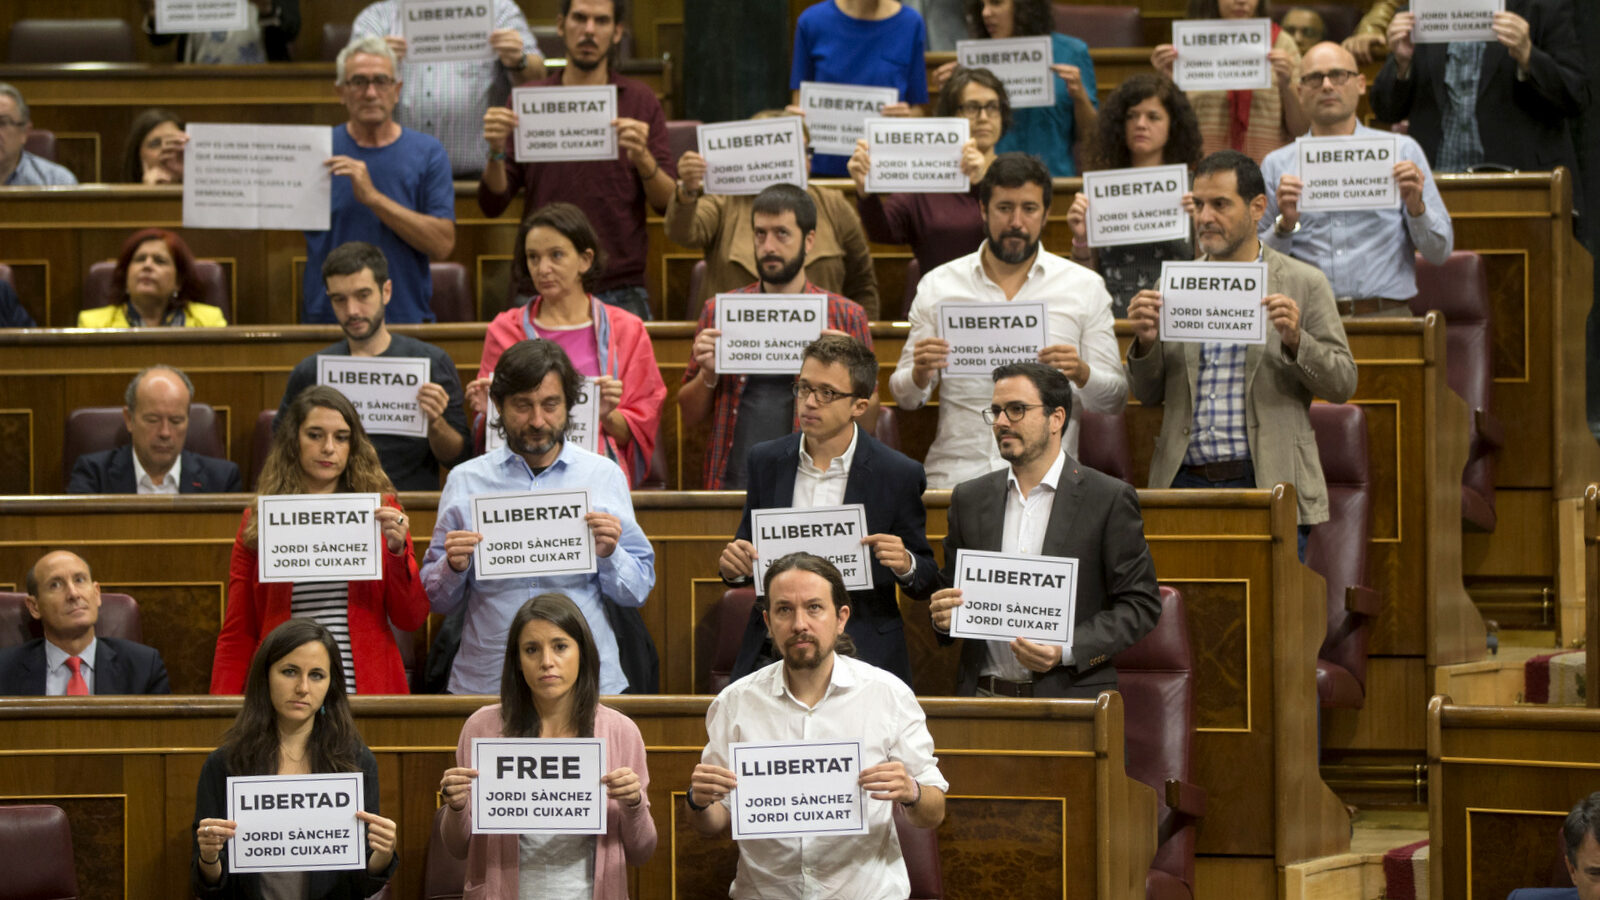 Lawmakers hold up posters reading: "Free Jordi Sanchez and Jordi Cuixart," leaders of the Catalan grassroots organizations Catalan National Assembly and Omnium Cultural, during a parliamentary session at the Spanish parliament in Madrid, Wednesday, Oct. 18, 2017. About 50 Spanish and Catalan party lawmakers held up posters in the parliament demanding the release of two pro-Catalonia independence movement leaders, describing them as political prisoners. (AP/Francisco Seco)